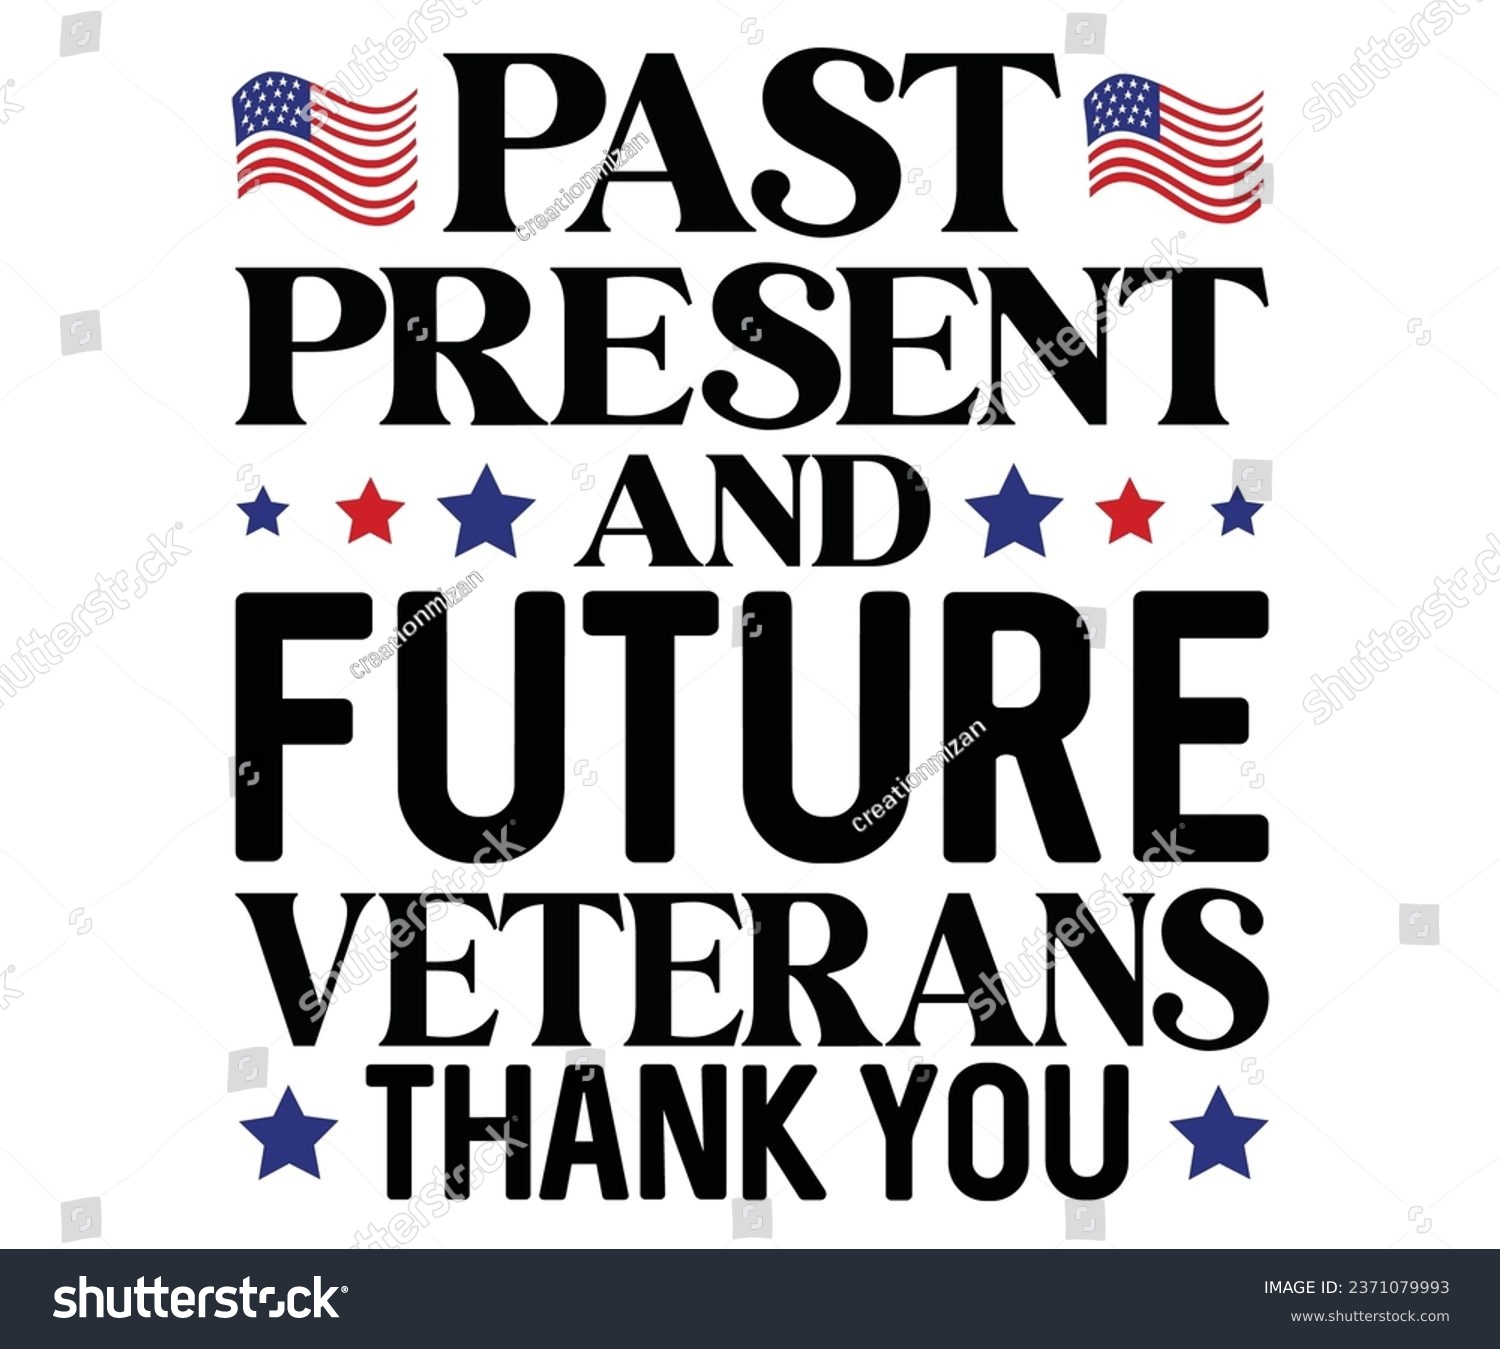 SVG of past present and future veterans thank you Svg,Veteran Clipart,Veteran Cutfile,Veteran Dad svg,Military svg,Military Dad svg,4th of July Clipart,Military Dad Gift Idea     
 svg